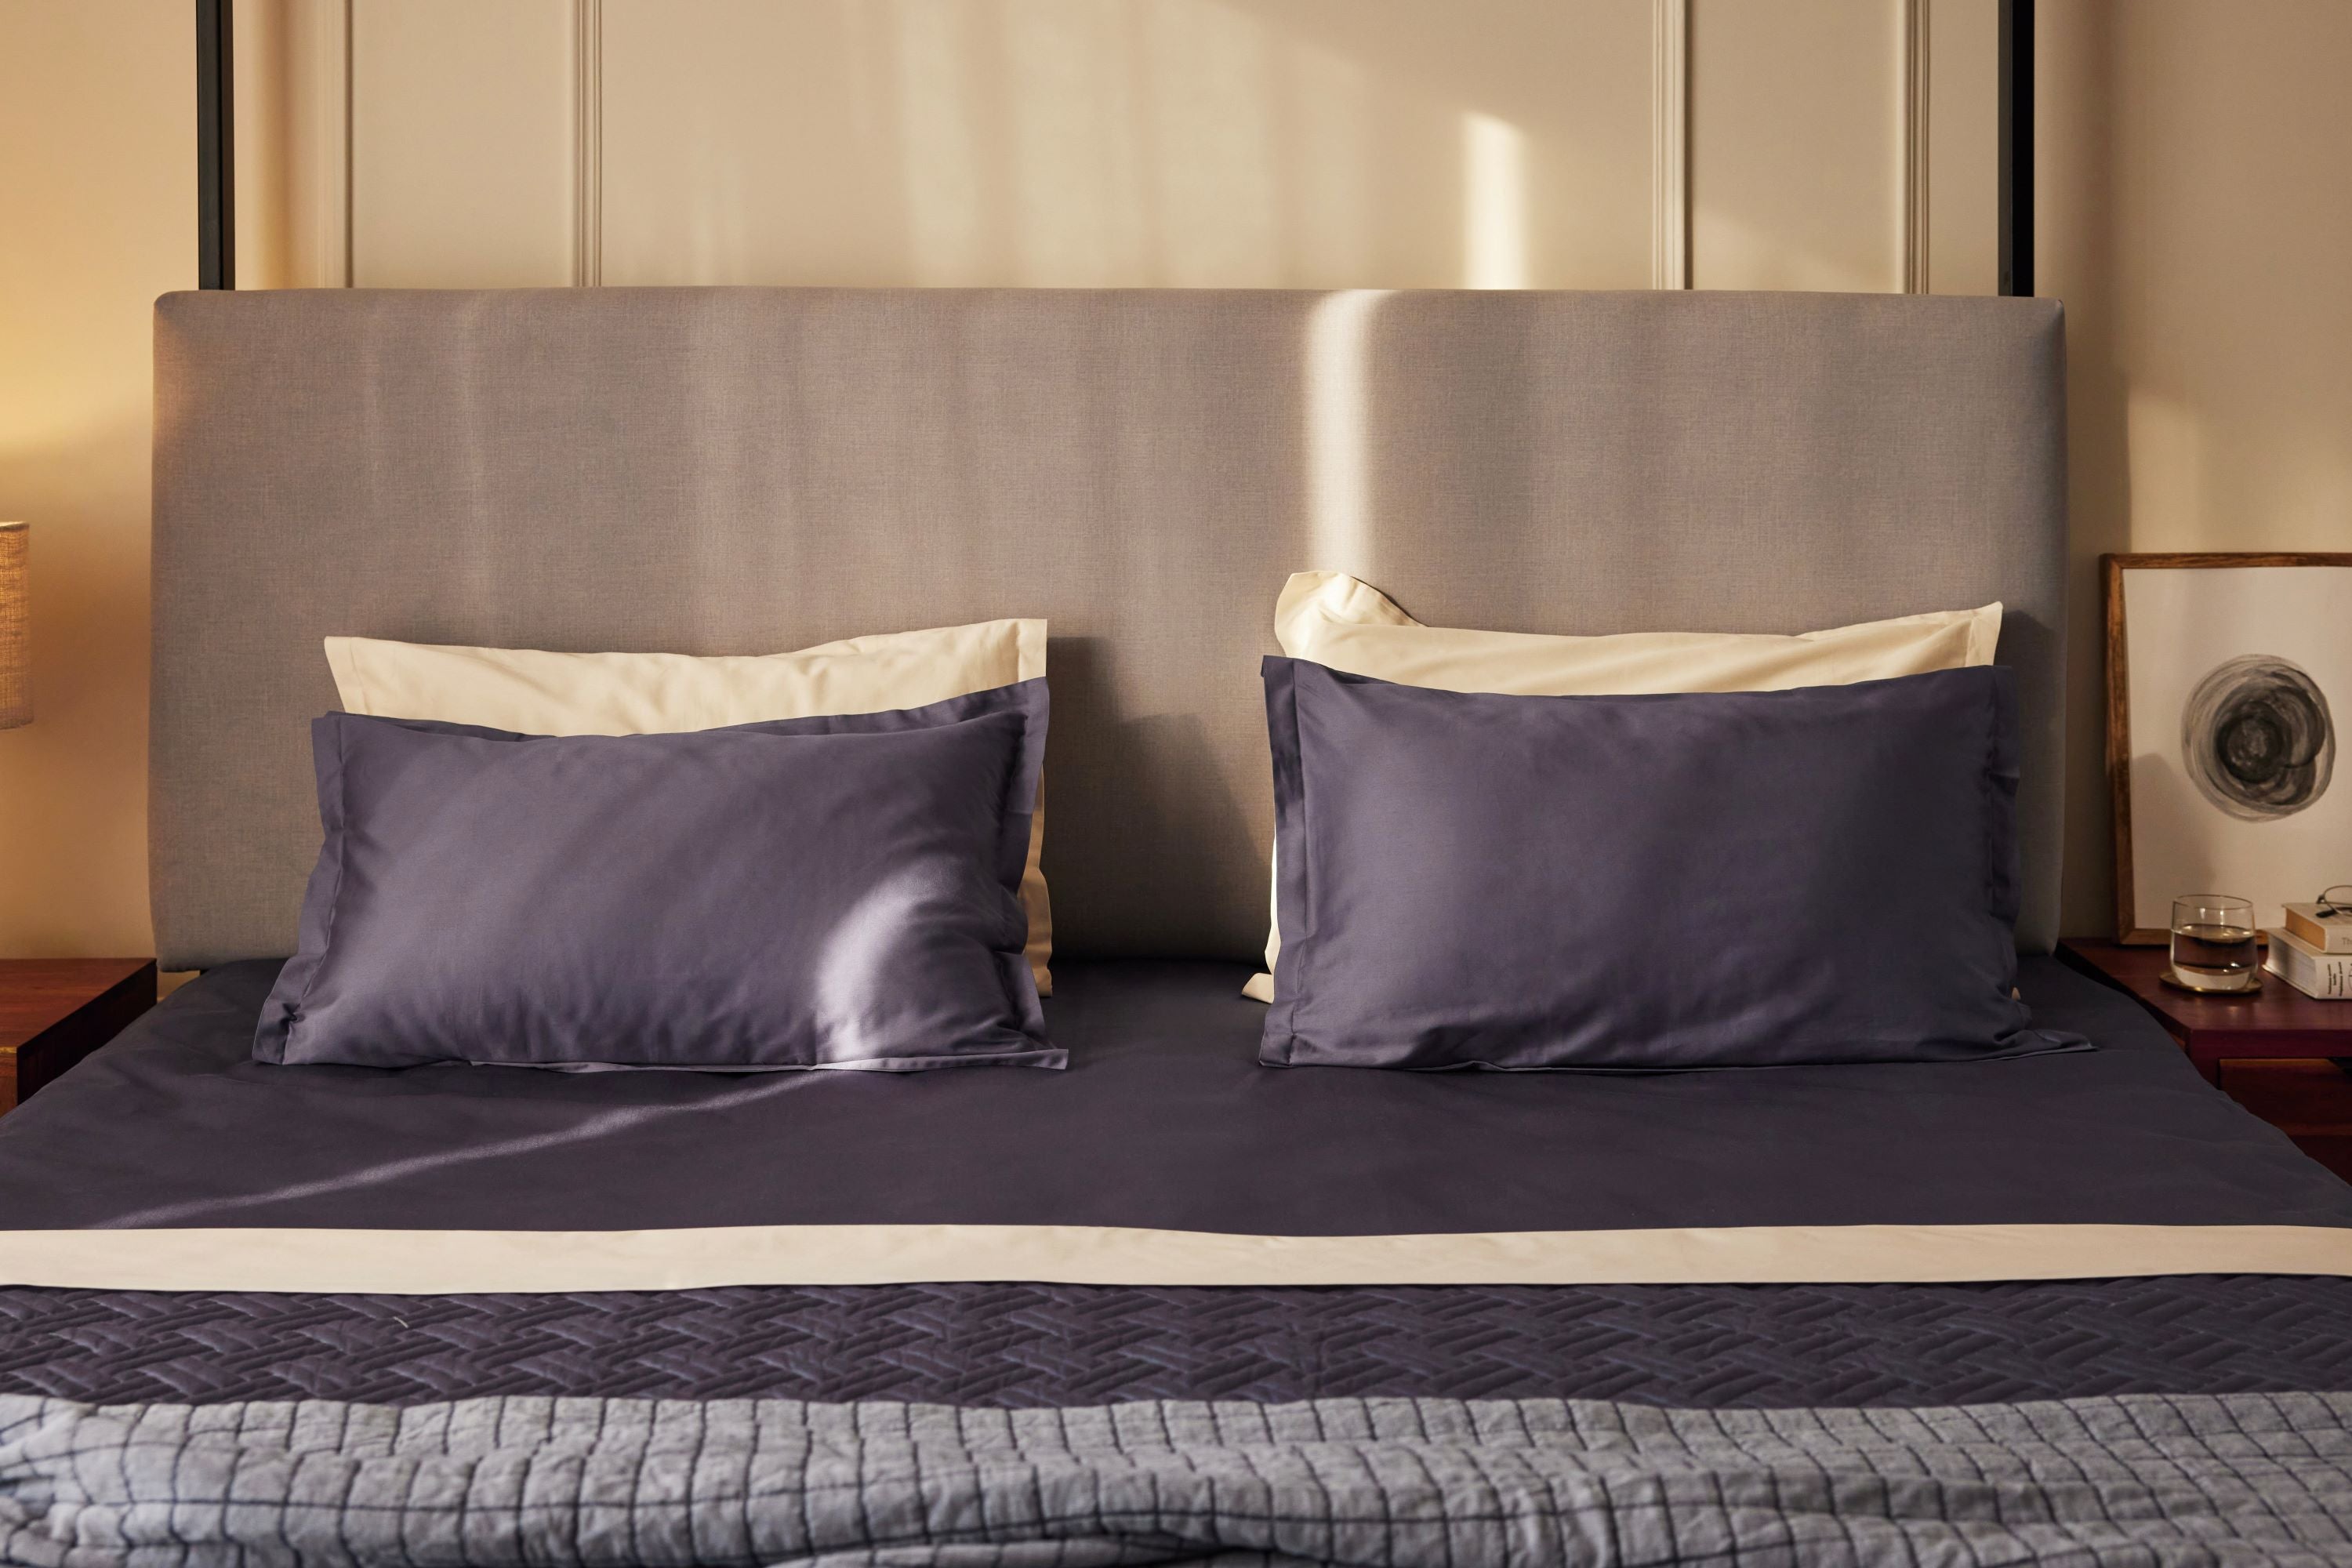 100% Organic Cotton Percale Flat Sheet and pillow cases with mattelasse and basketweave coverlets